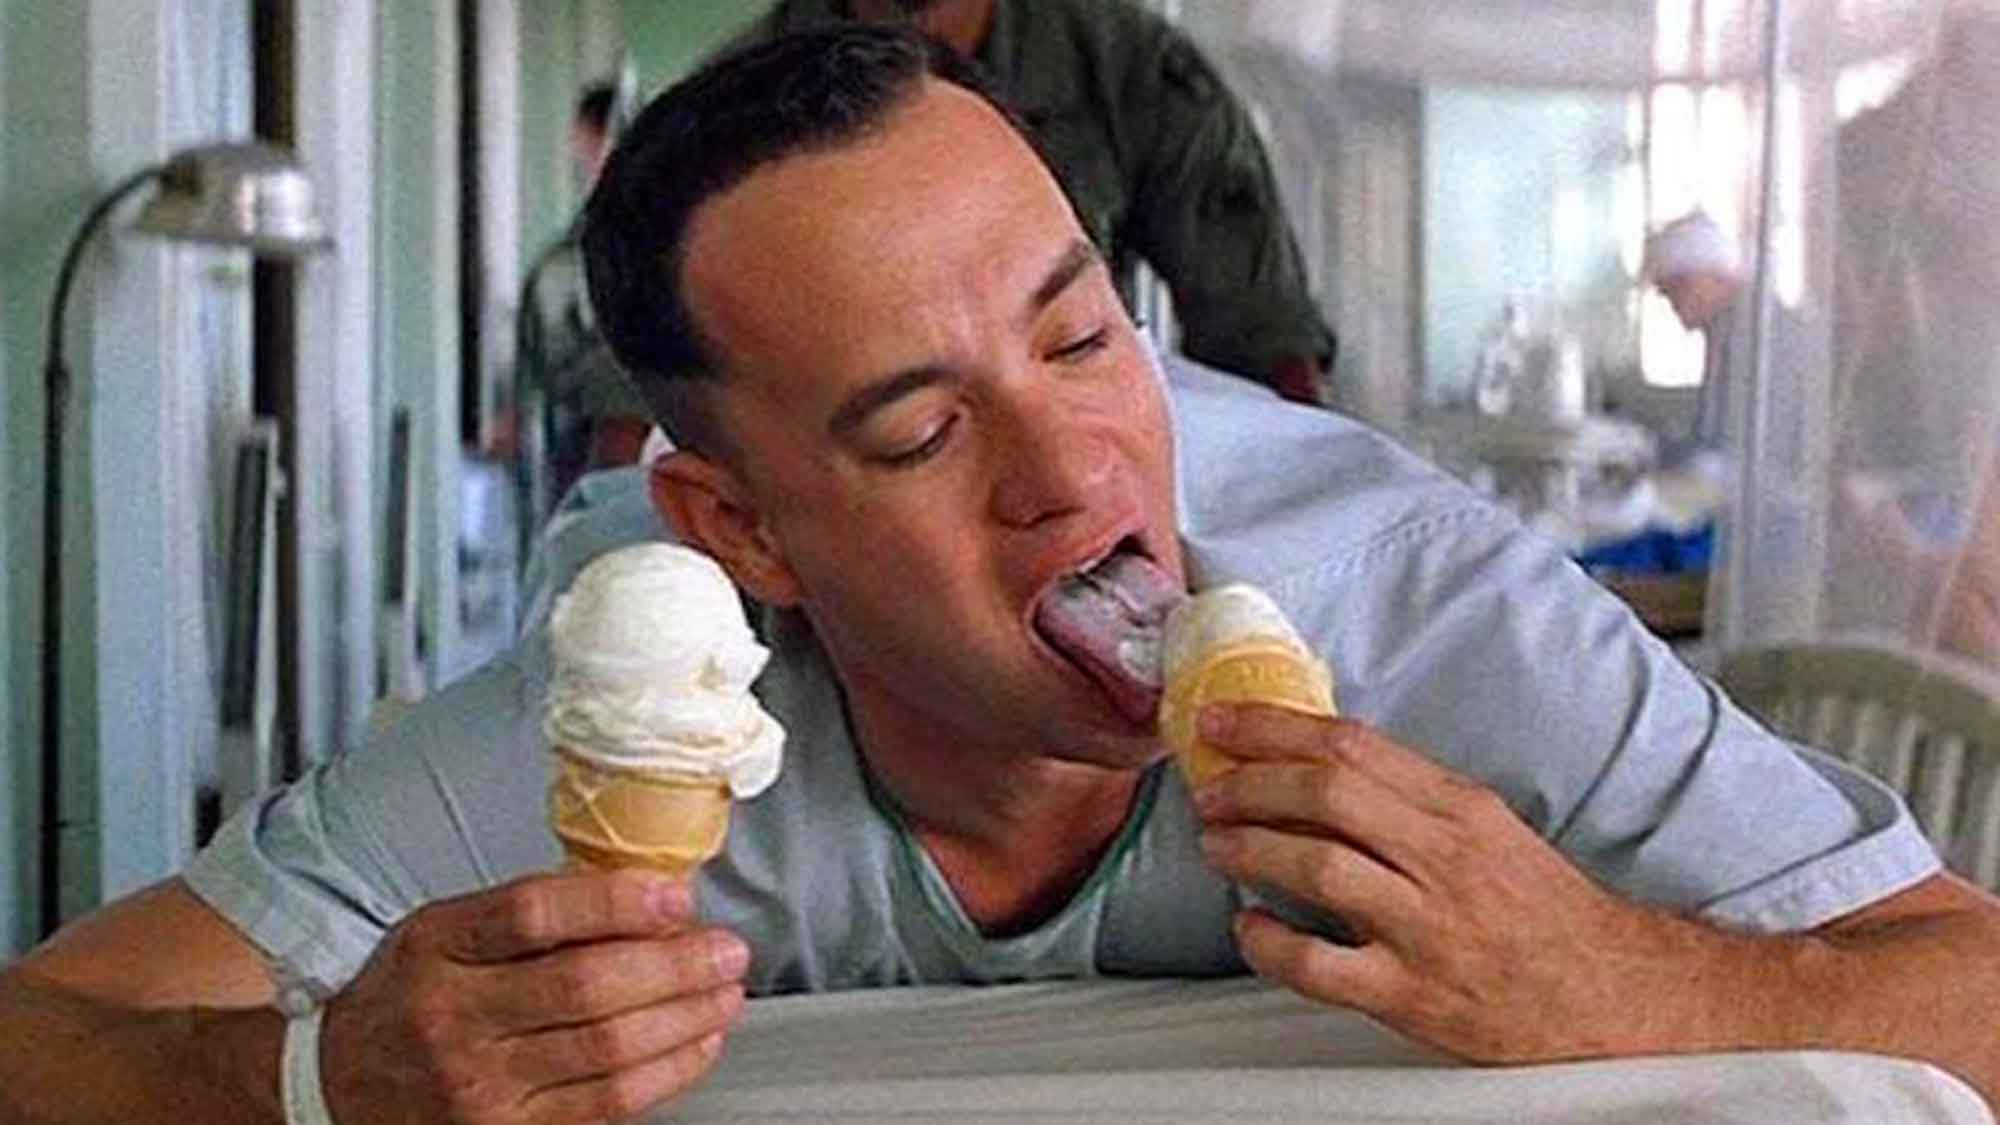 13 Inspirational Forrest Gump Quotes That Will Warm Your Heart